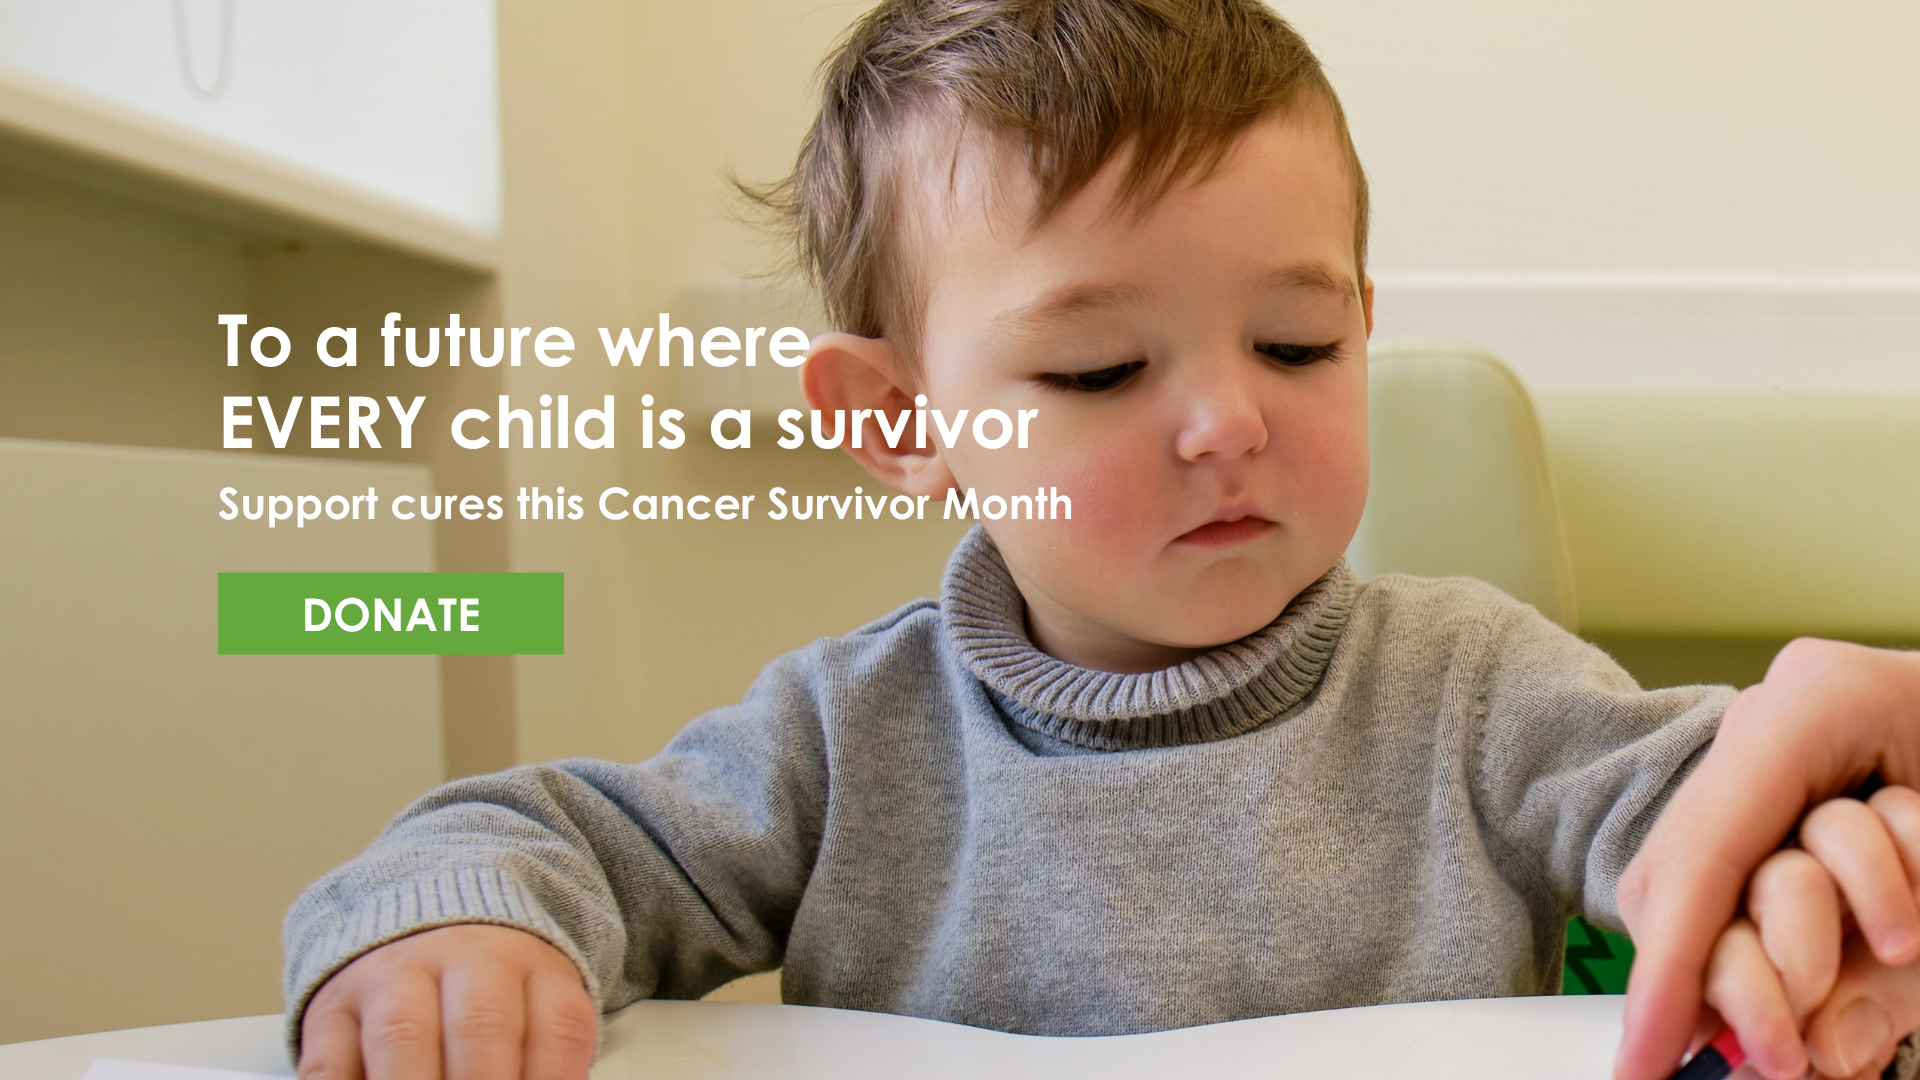 Support cures this Cancer Survivor Month by donating to CureSearch for Children's Cancer